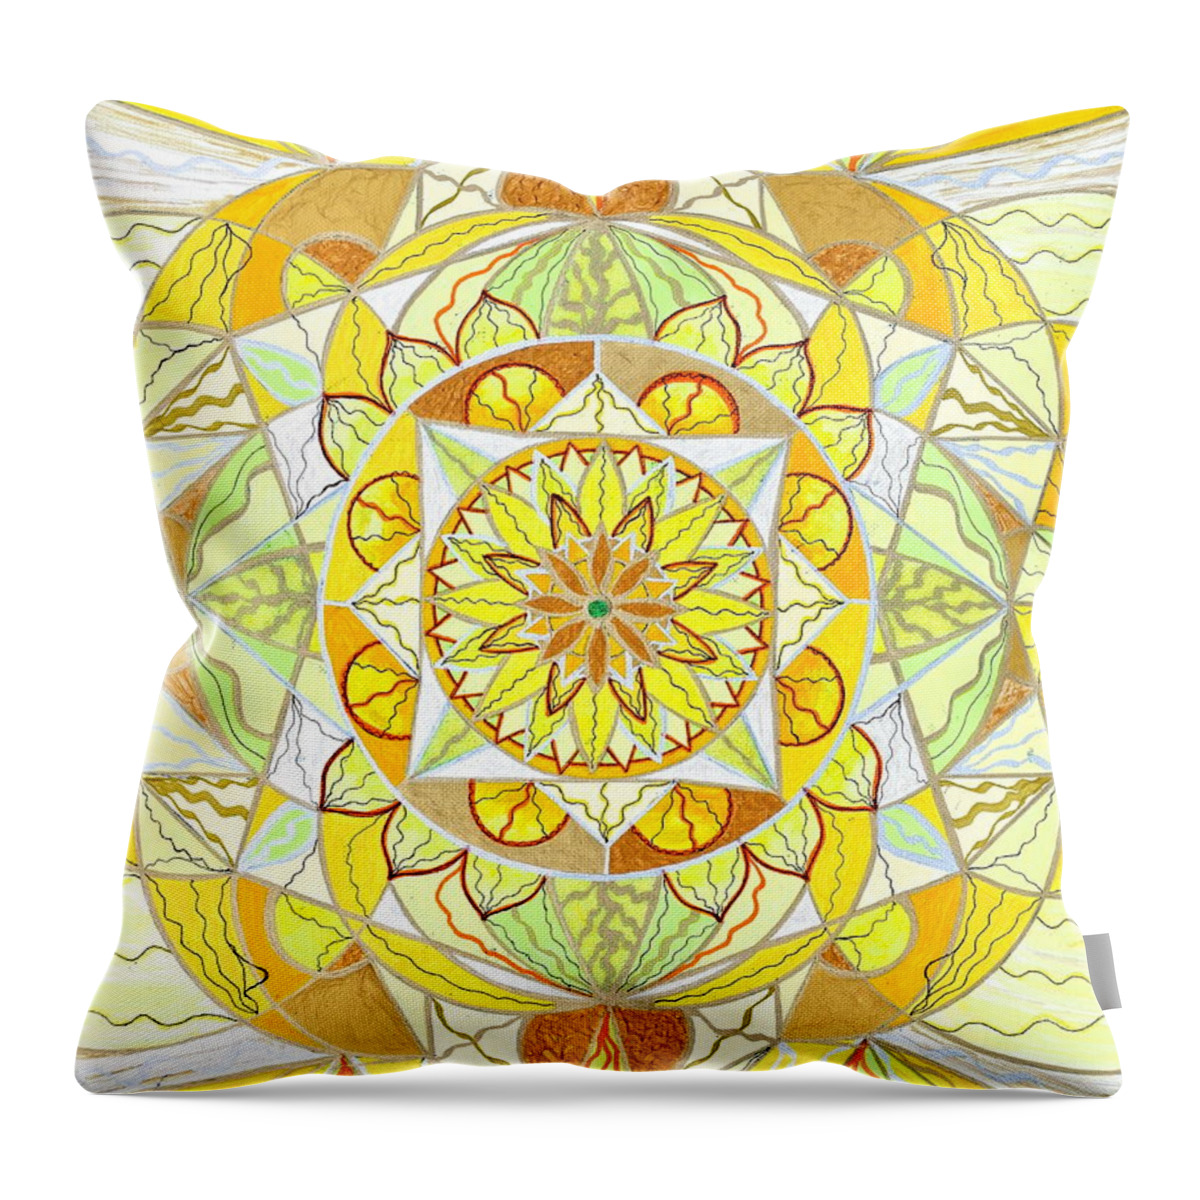 Joy Throw Pillow featuring the painting Joy by Teal Eye Print Store